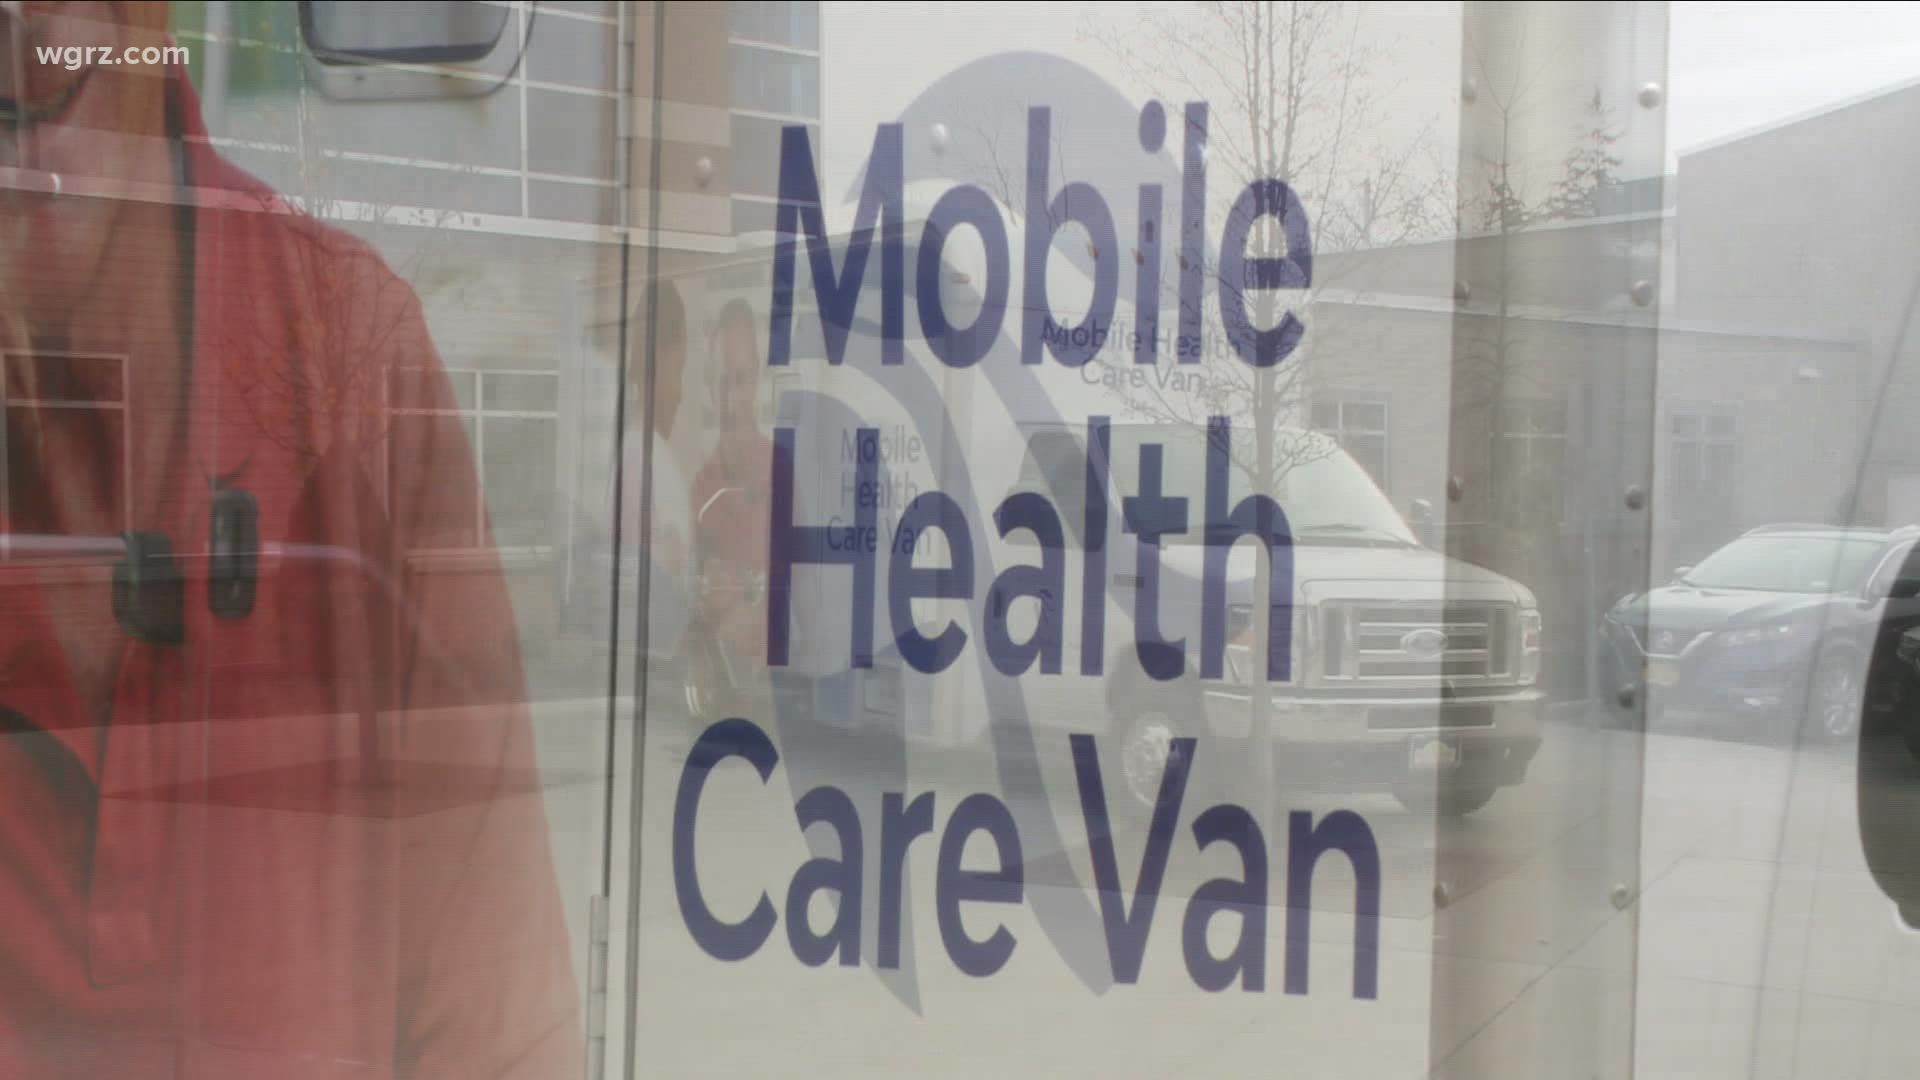 Niagara Falls Memorial unveiled its new mobile health care van Tuesday morning. The fully equipped vehicle will have a wide range of services.